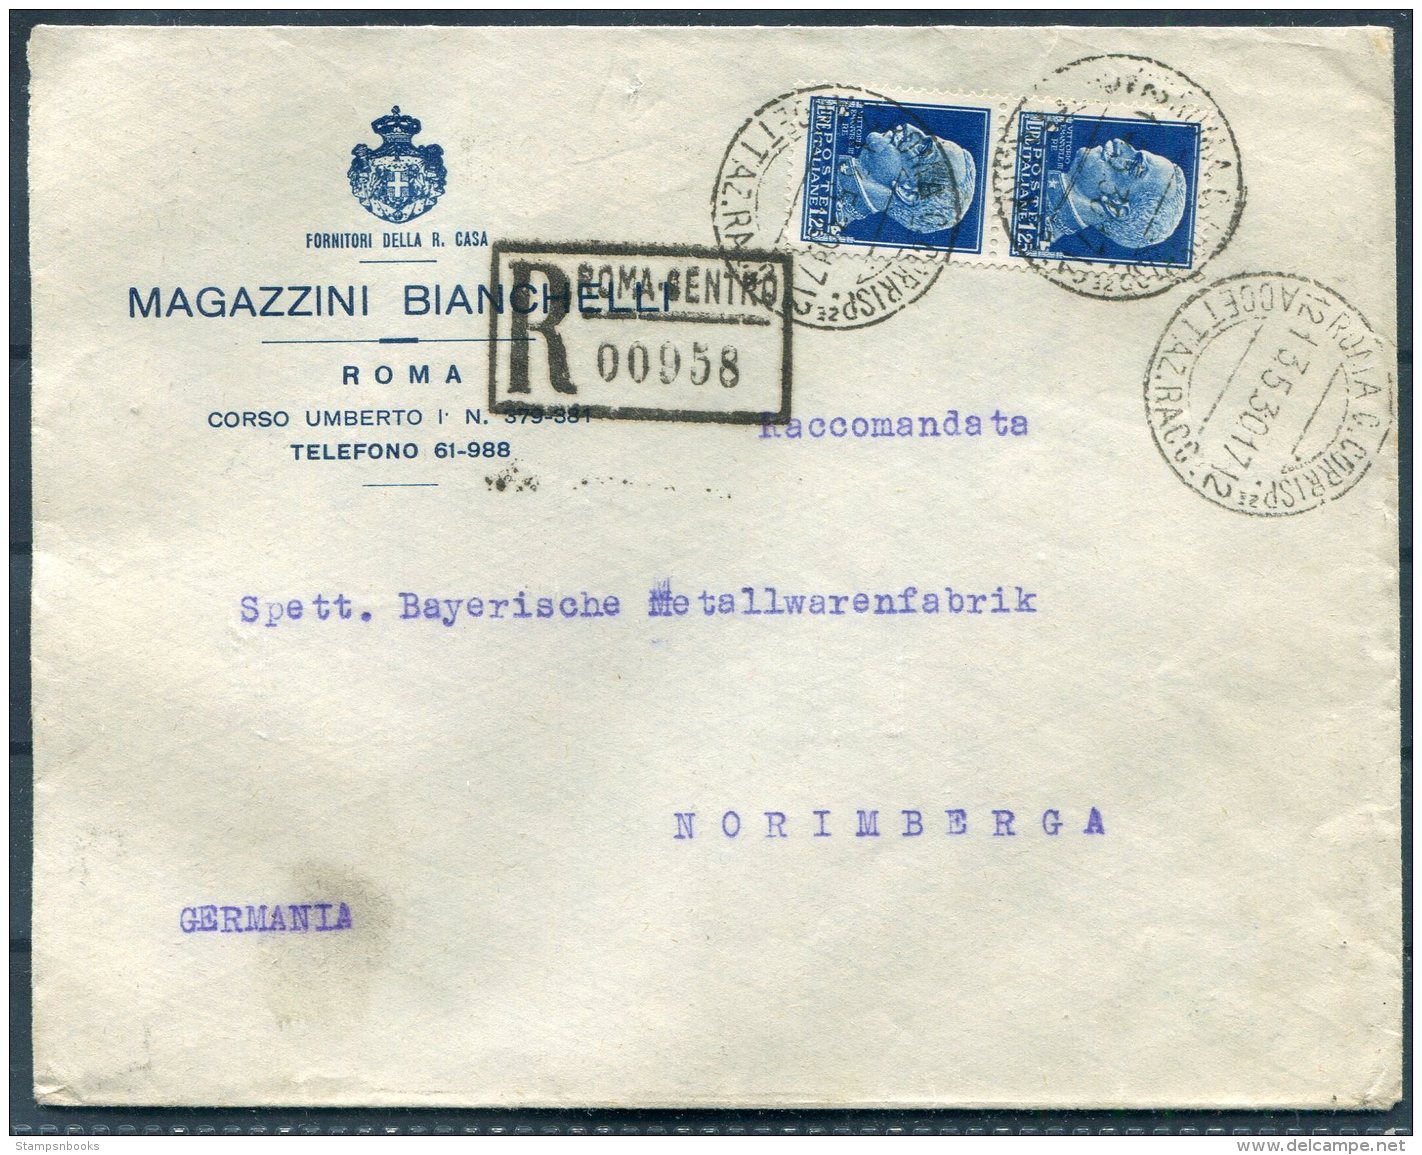 1930 Italy Registered Magazzini Bianchelli Rome Roma Cover - Nurnberg Germany. - Marcophilia